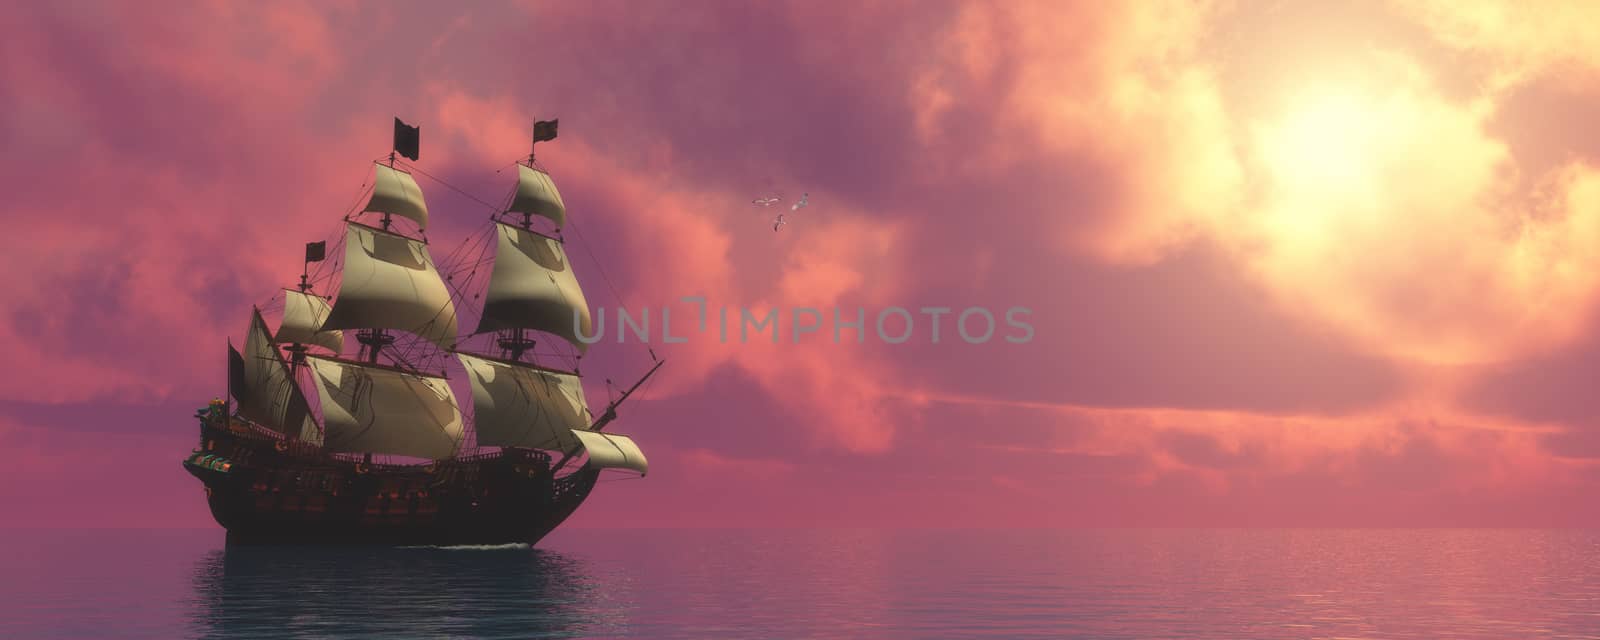 Galleon Ship with Sails by Catmando